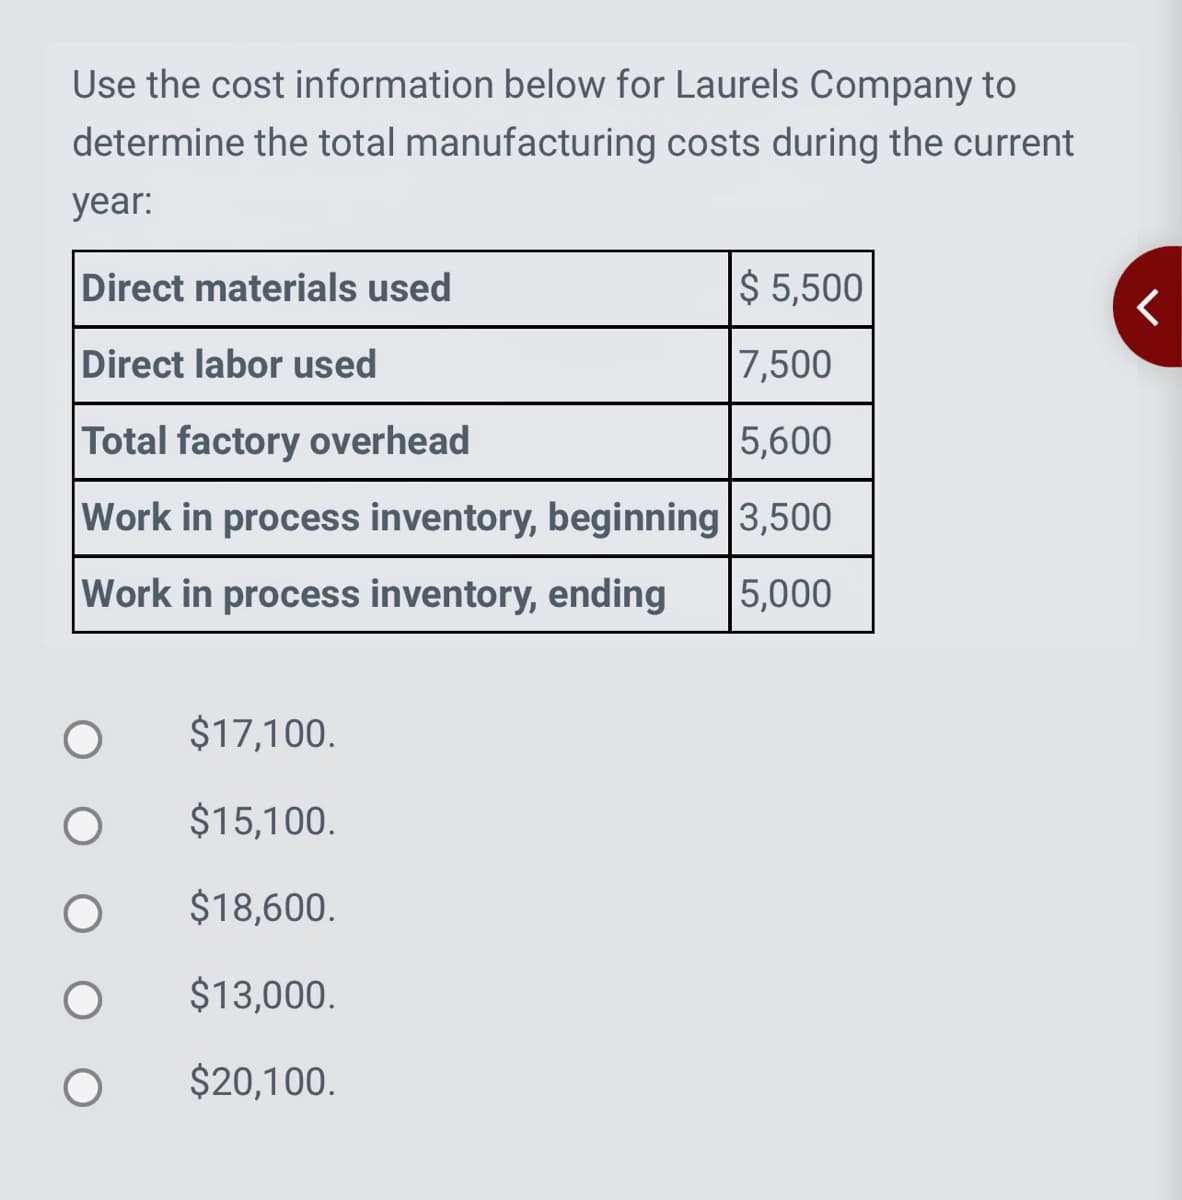 Use the cost information below for Laurels Company to
determine the total manufacturing costs during the current
year:
Direct materials used
$ 5,500
Direct labor used
7,500
Total factory overhead
5,600
Work in process inventory, beginning 3,500
Work in process inventory, ending 5,000
$17,100.
$15,100.
$18,600.
$13,000.
$20,100.
<